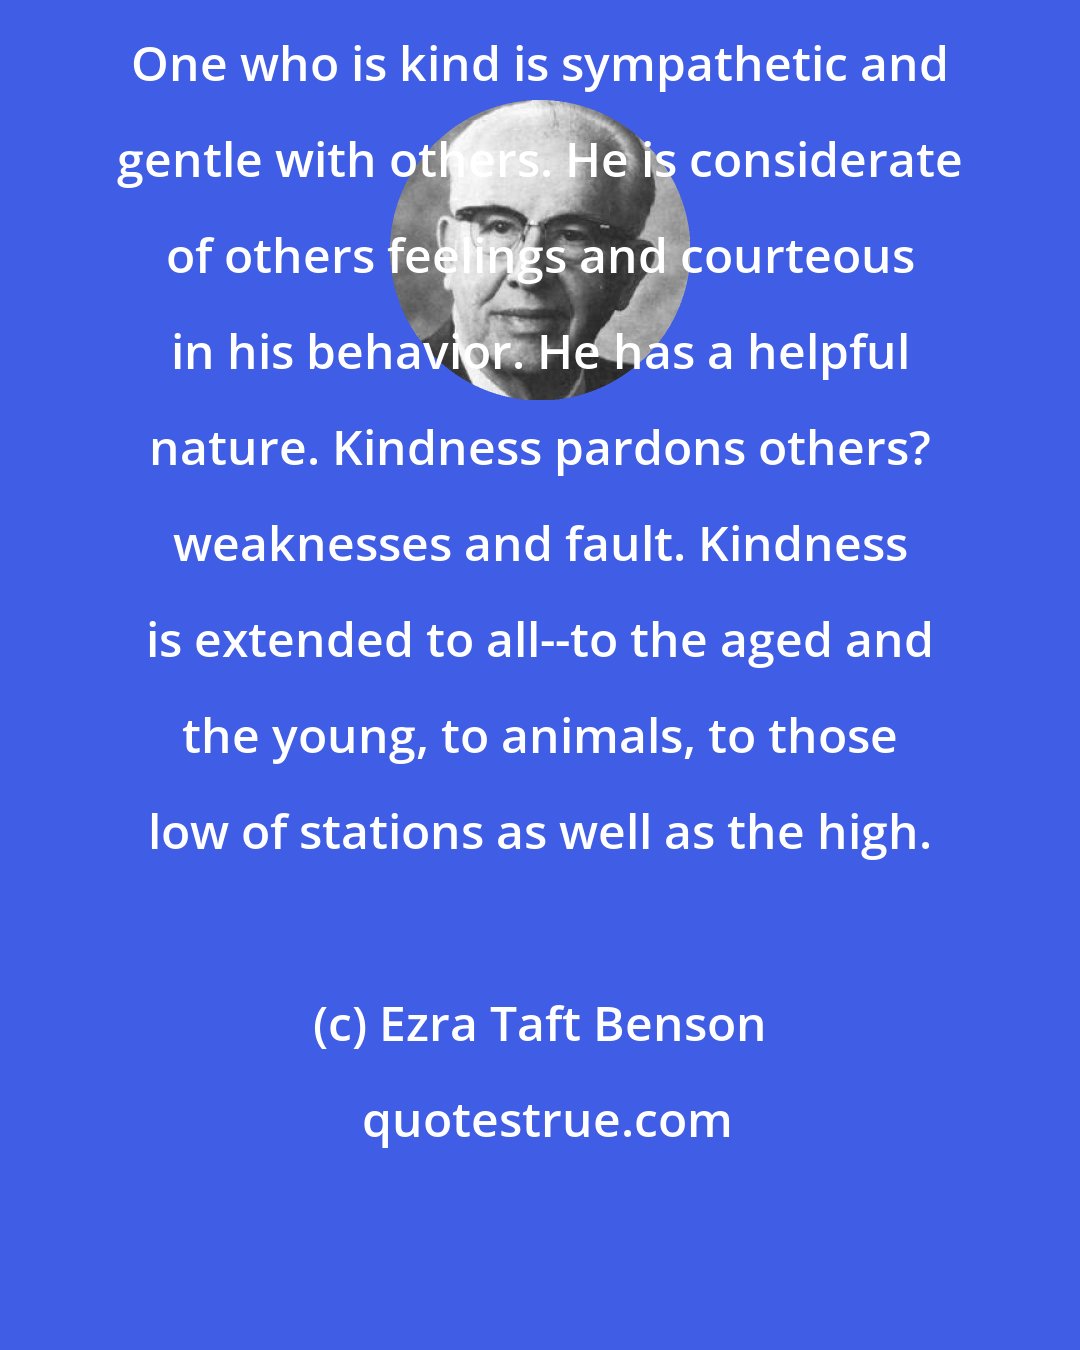 Ezra Taft Benson: One who is kind is sympathetic and gentle with others. He is considerate of others feelings and courteous in his behavior. He has a helpful nature. Kindness pardons others? weaknesses and fault. Kindness is extended to all--to the aged and the young, to animals, to those low of stations as well as the high.